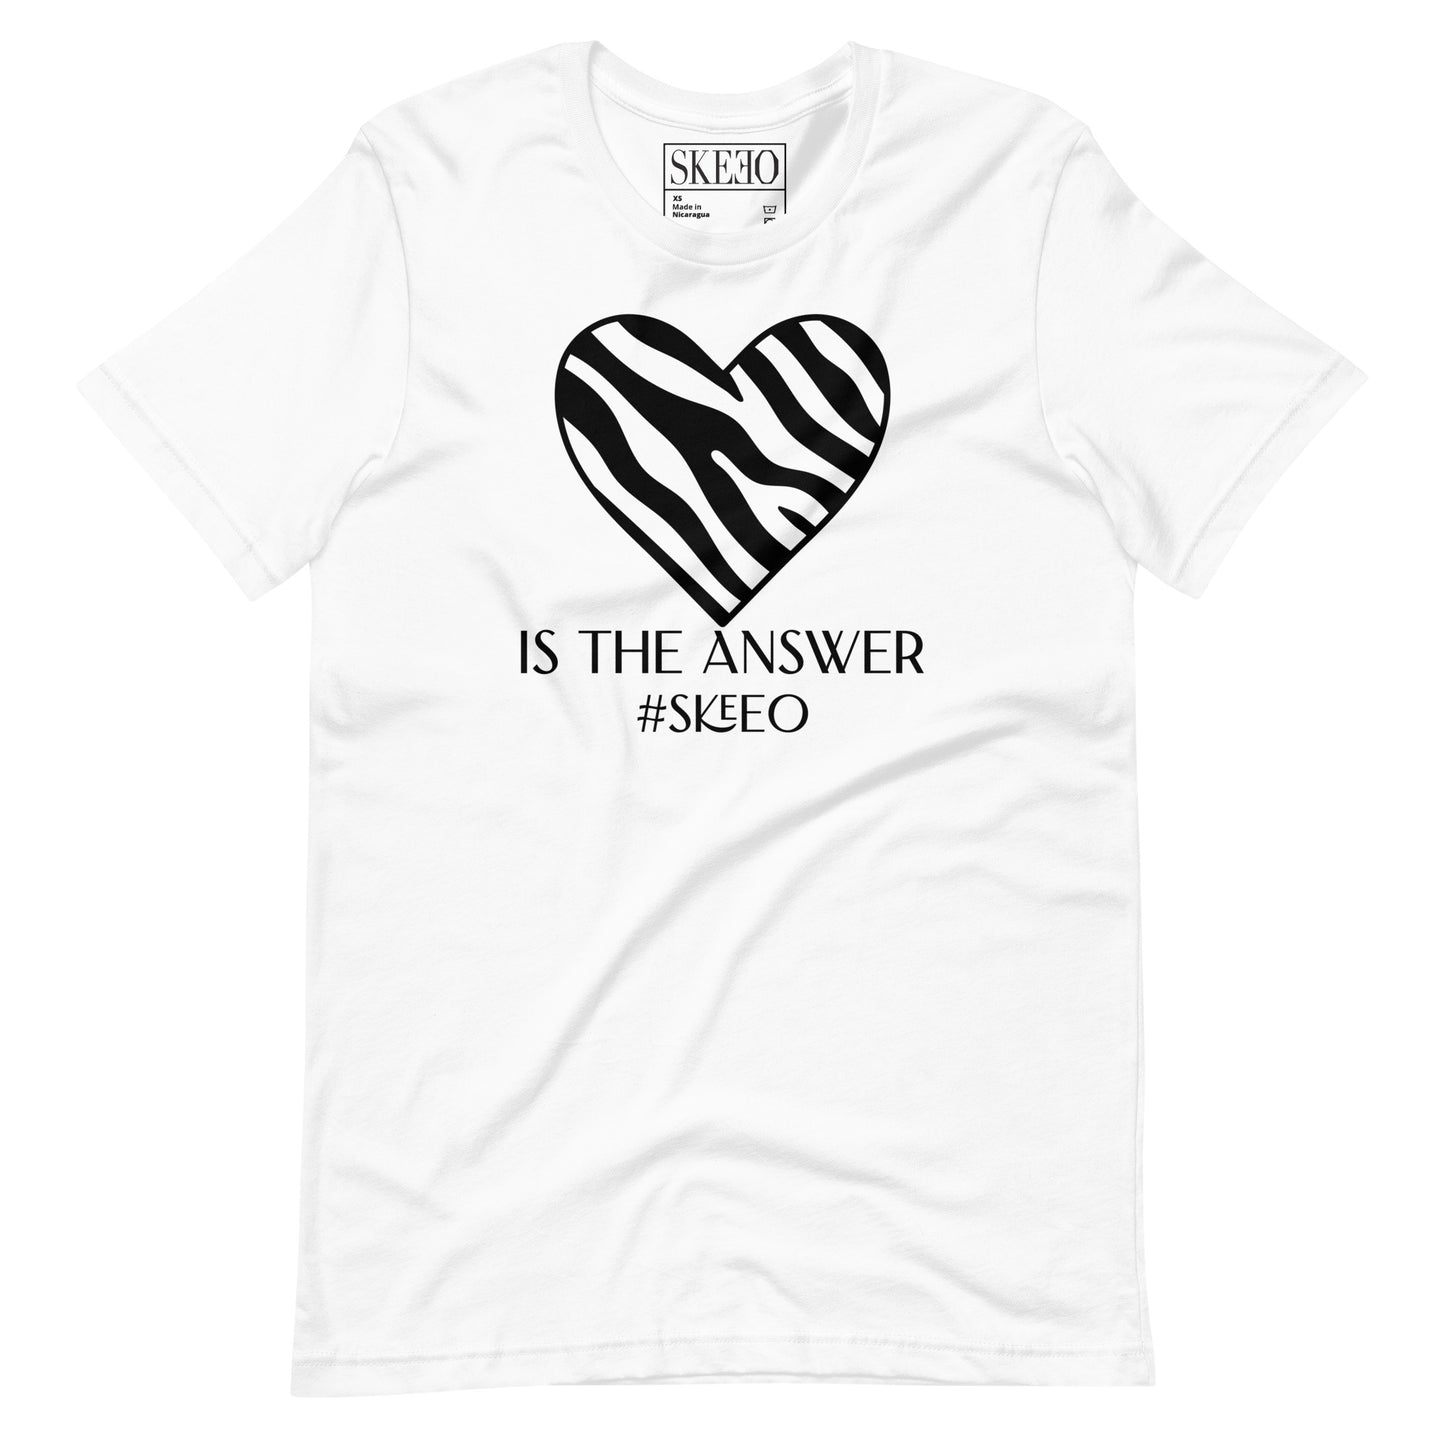 SK A A Lover is the answer t-shirt